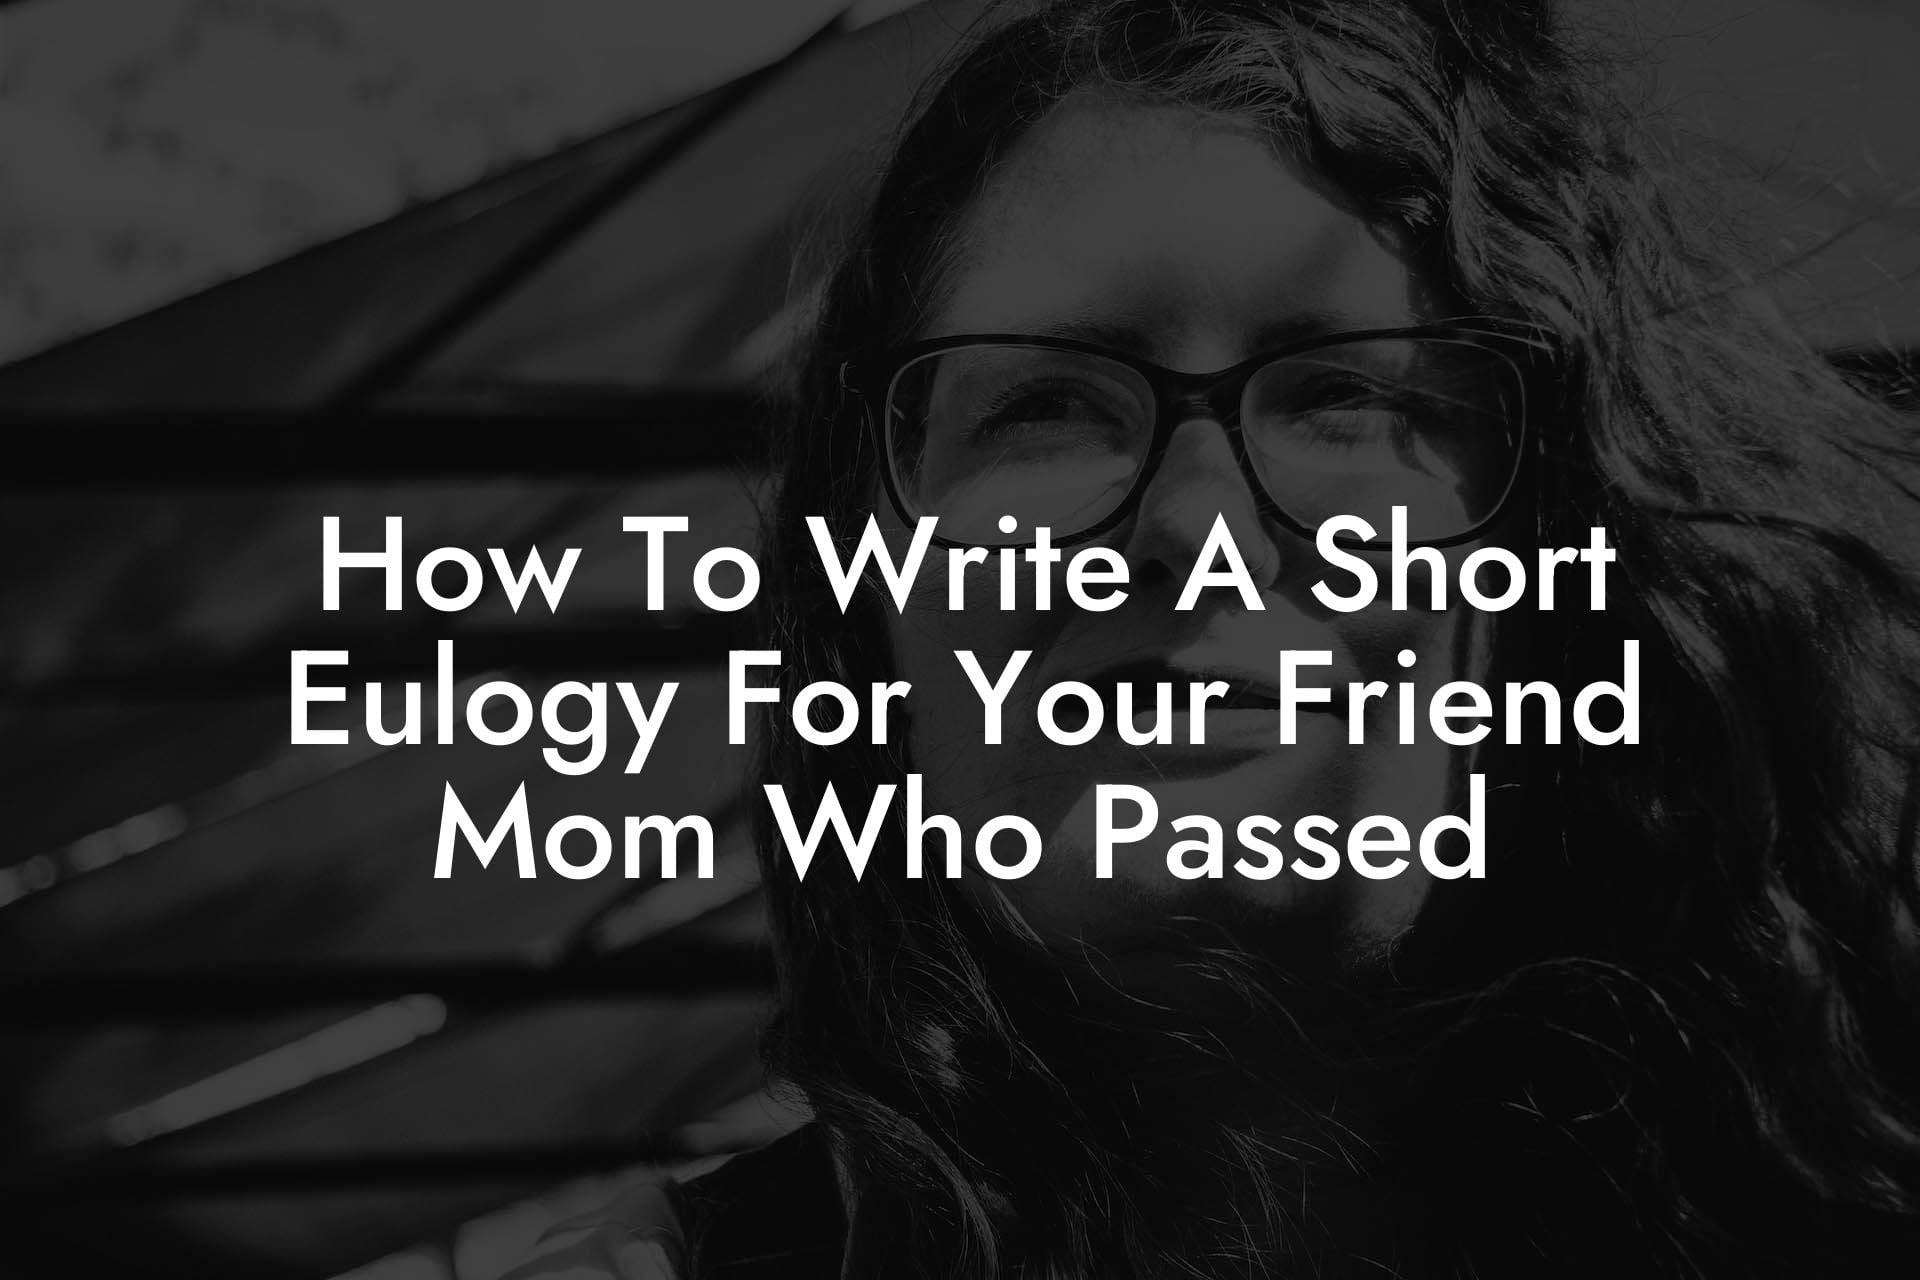 How To Write A Short Eulogy For Your Friend Mom Who Passed